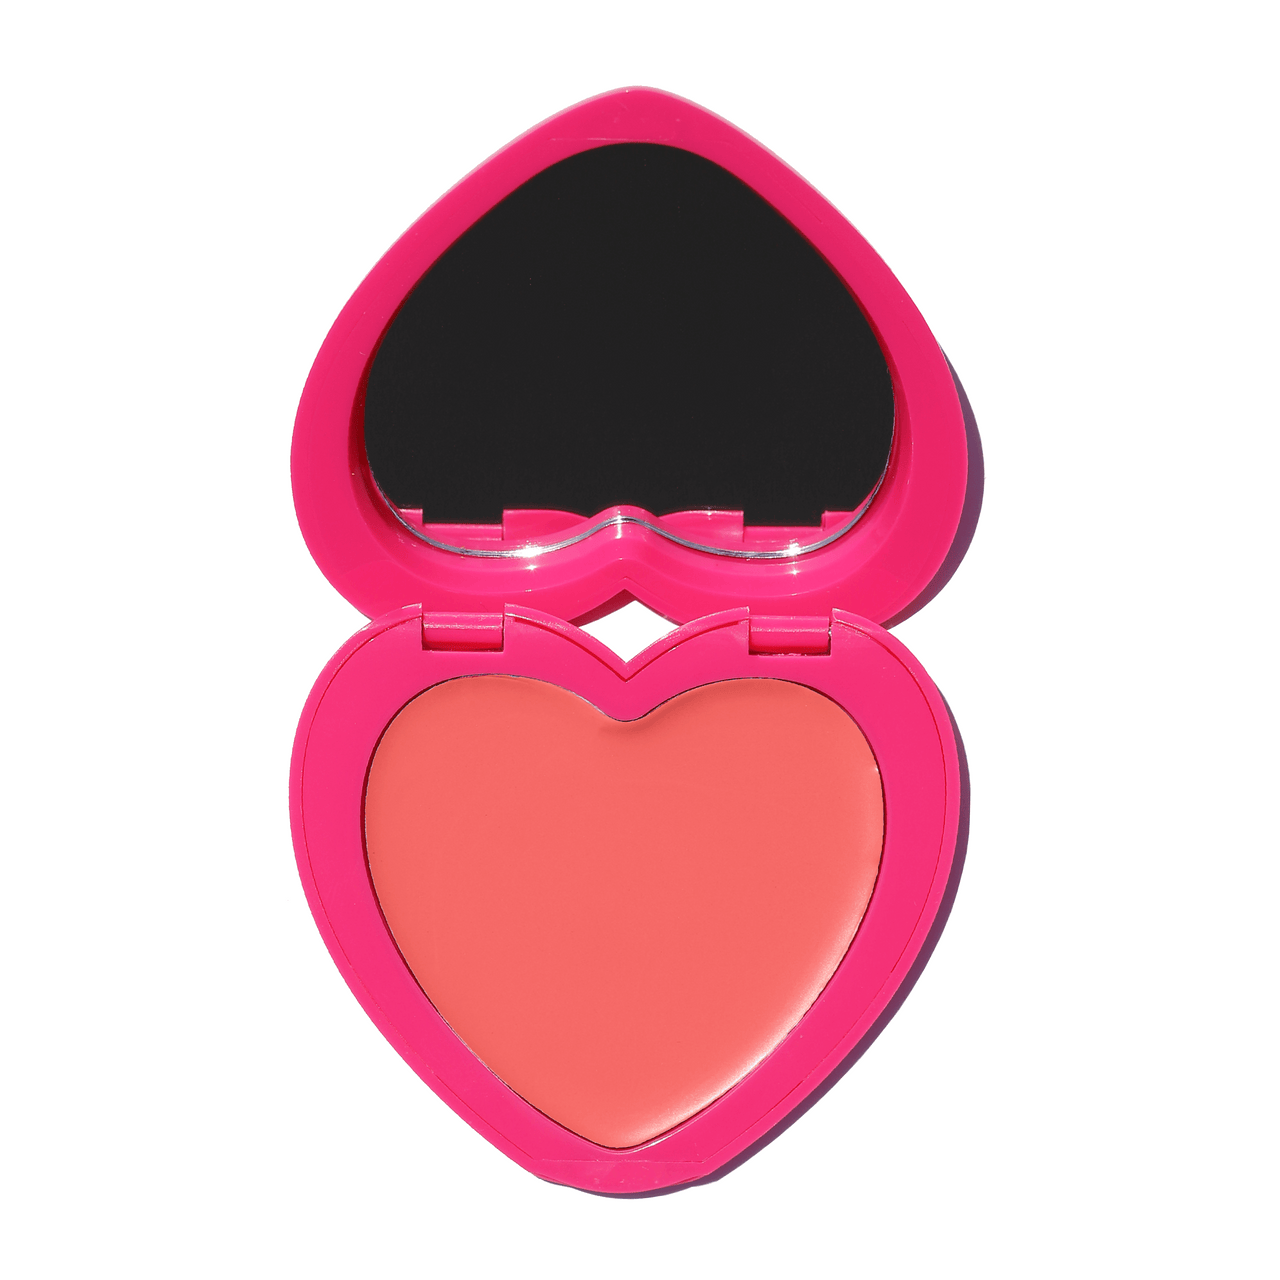 Heart-shaped compact of Candy Paint Cheek + Lip Tint in a soft peach shade with a built-in mirror, perfect for adding a touch of dewy, radiant color to cheeks and lips.